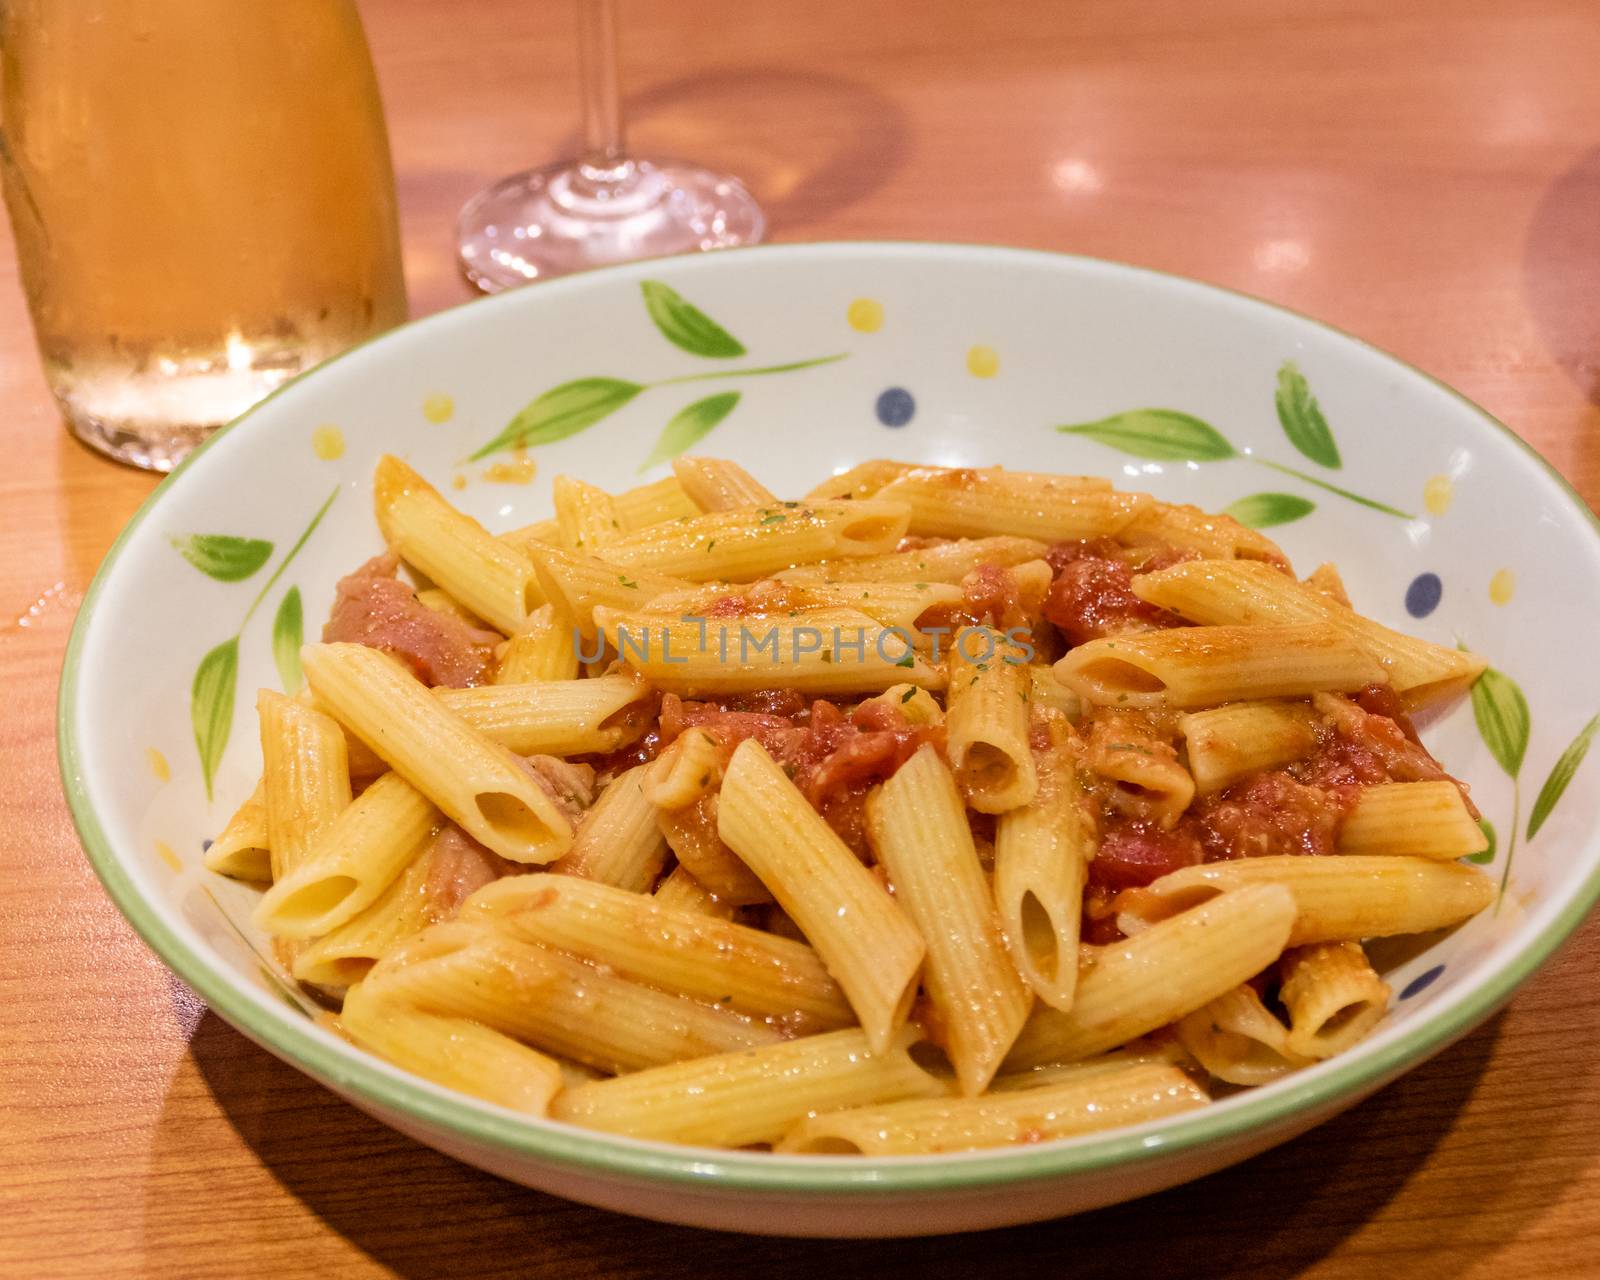 Pasta alfredo penne with tomato based sauce in plate